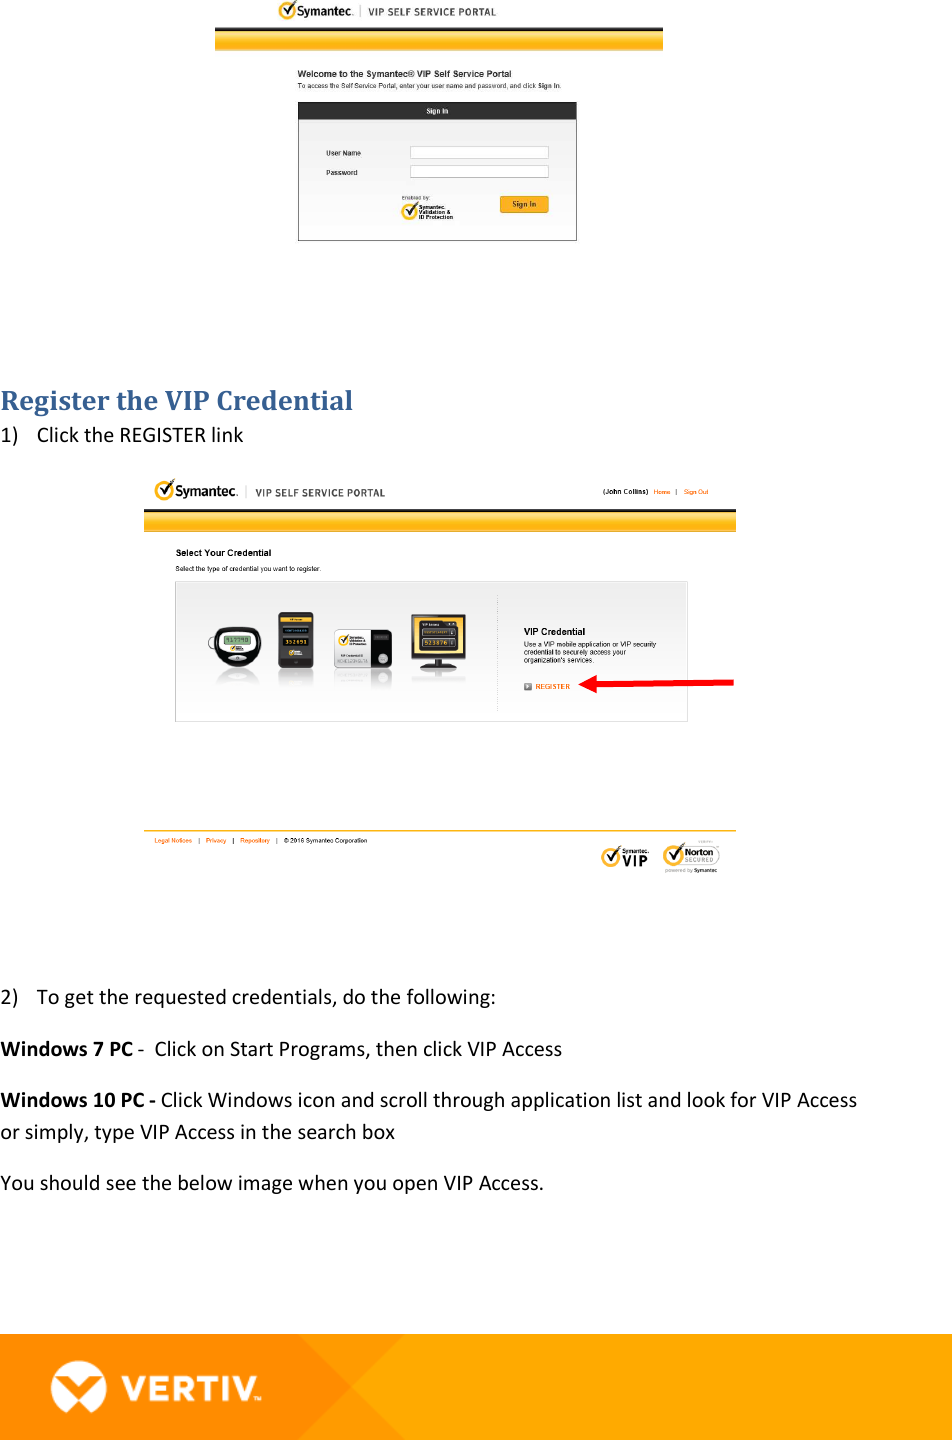 Page 4 of 8 - Vertiv Employee Remote Access And VIP End User Guide-Verizon Guide